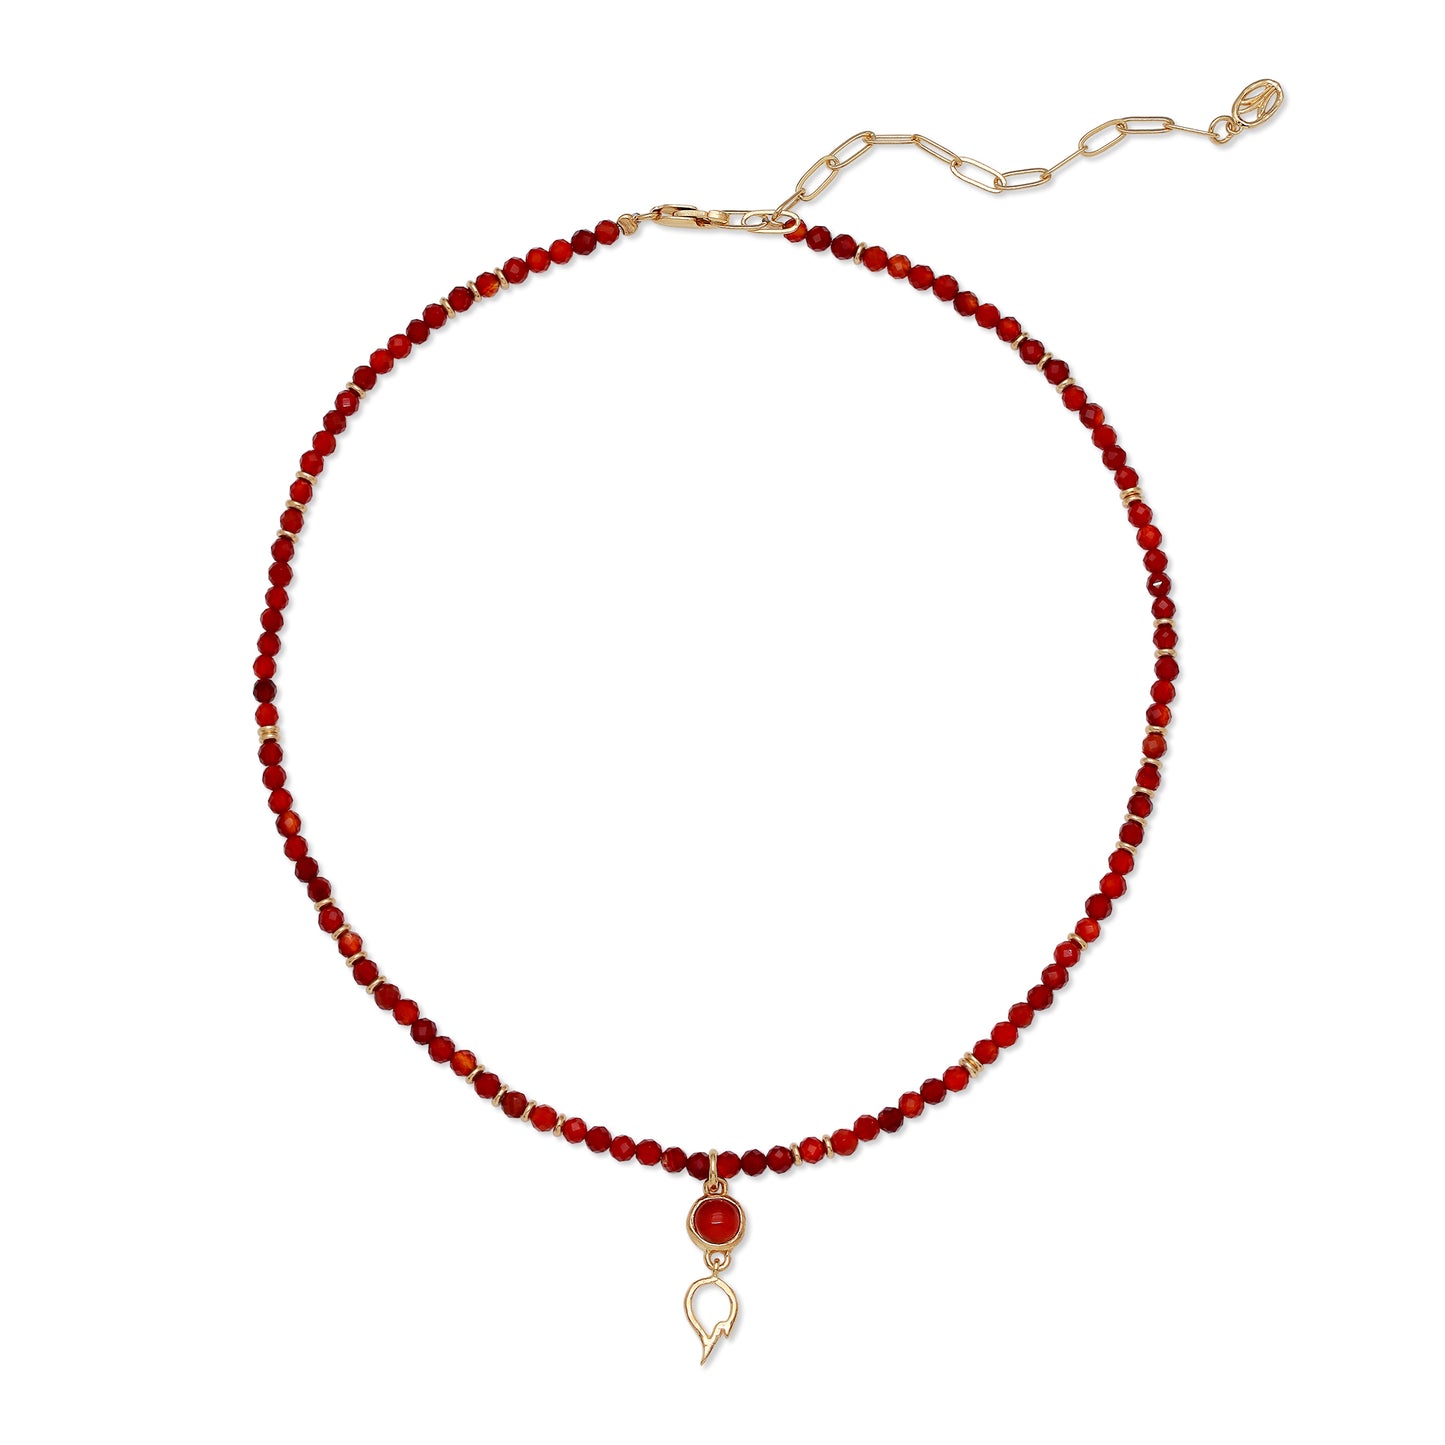 Carnelian Fire Element Beaded Necklace and Pendant